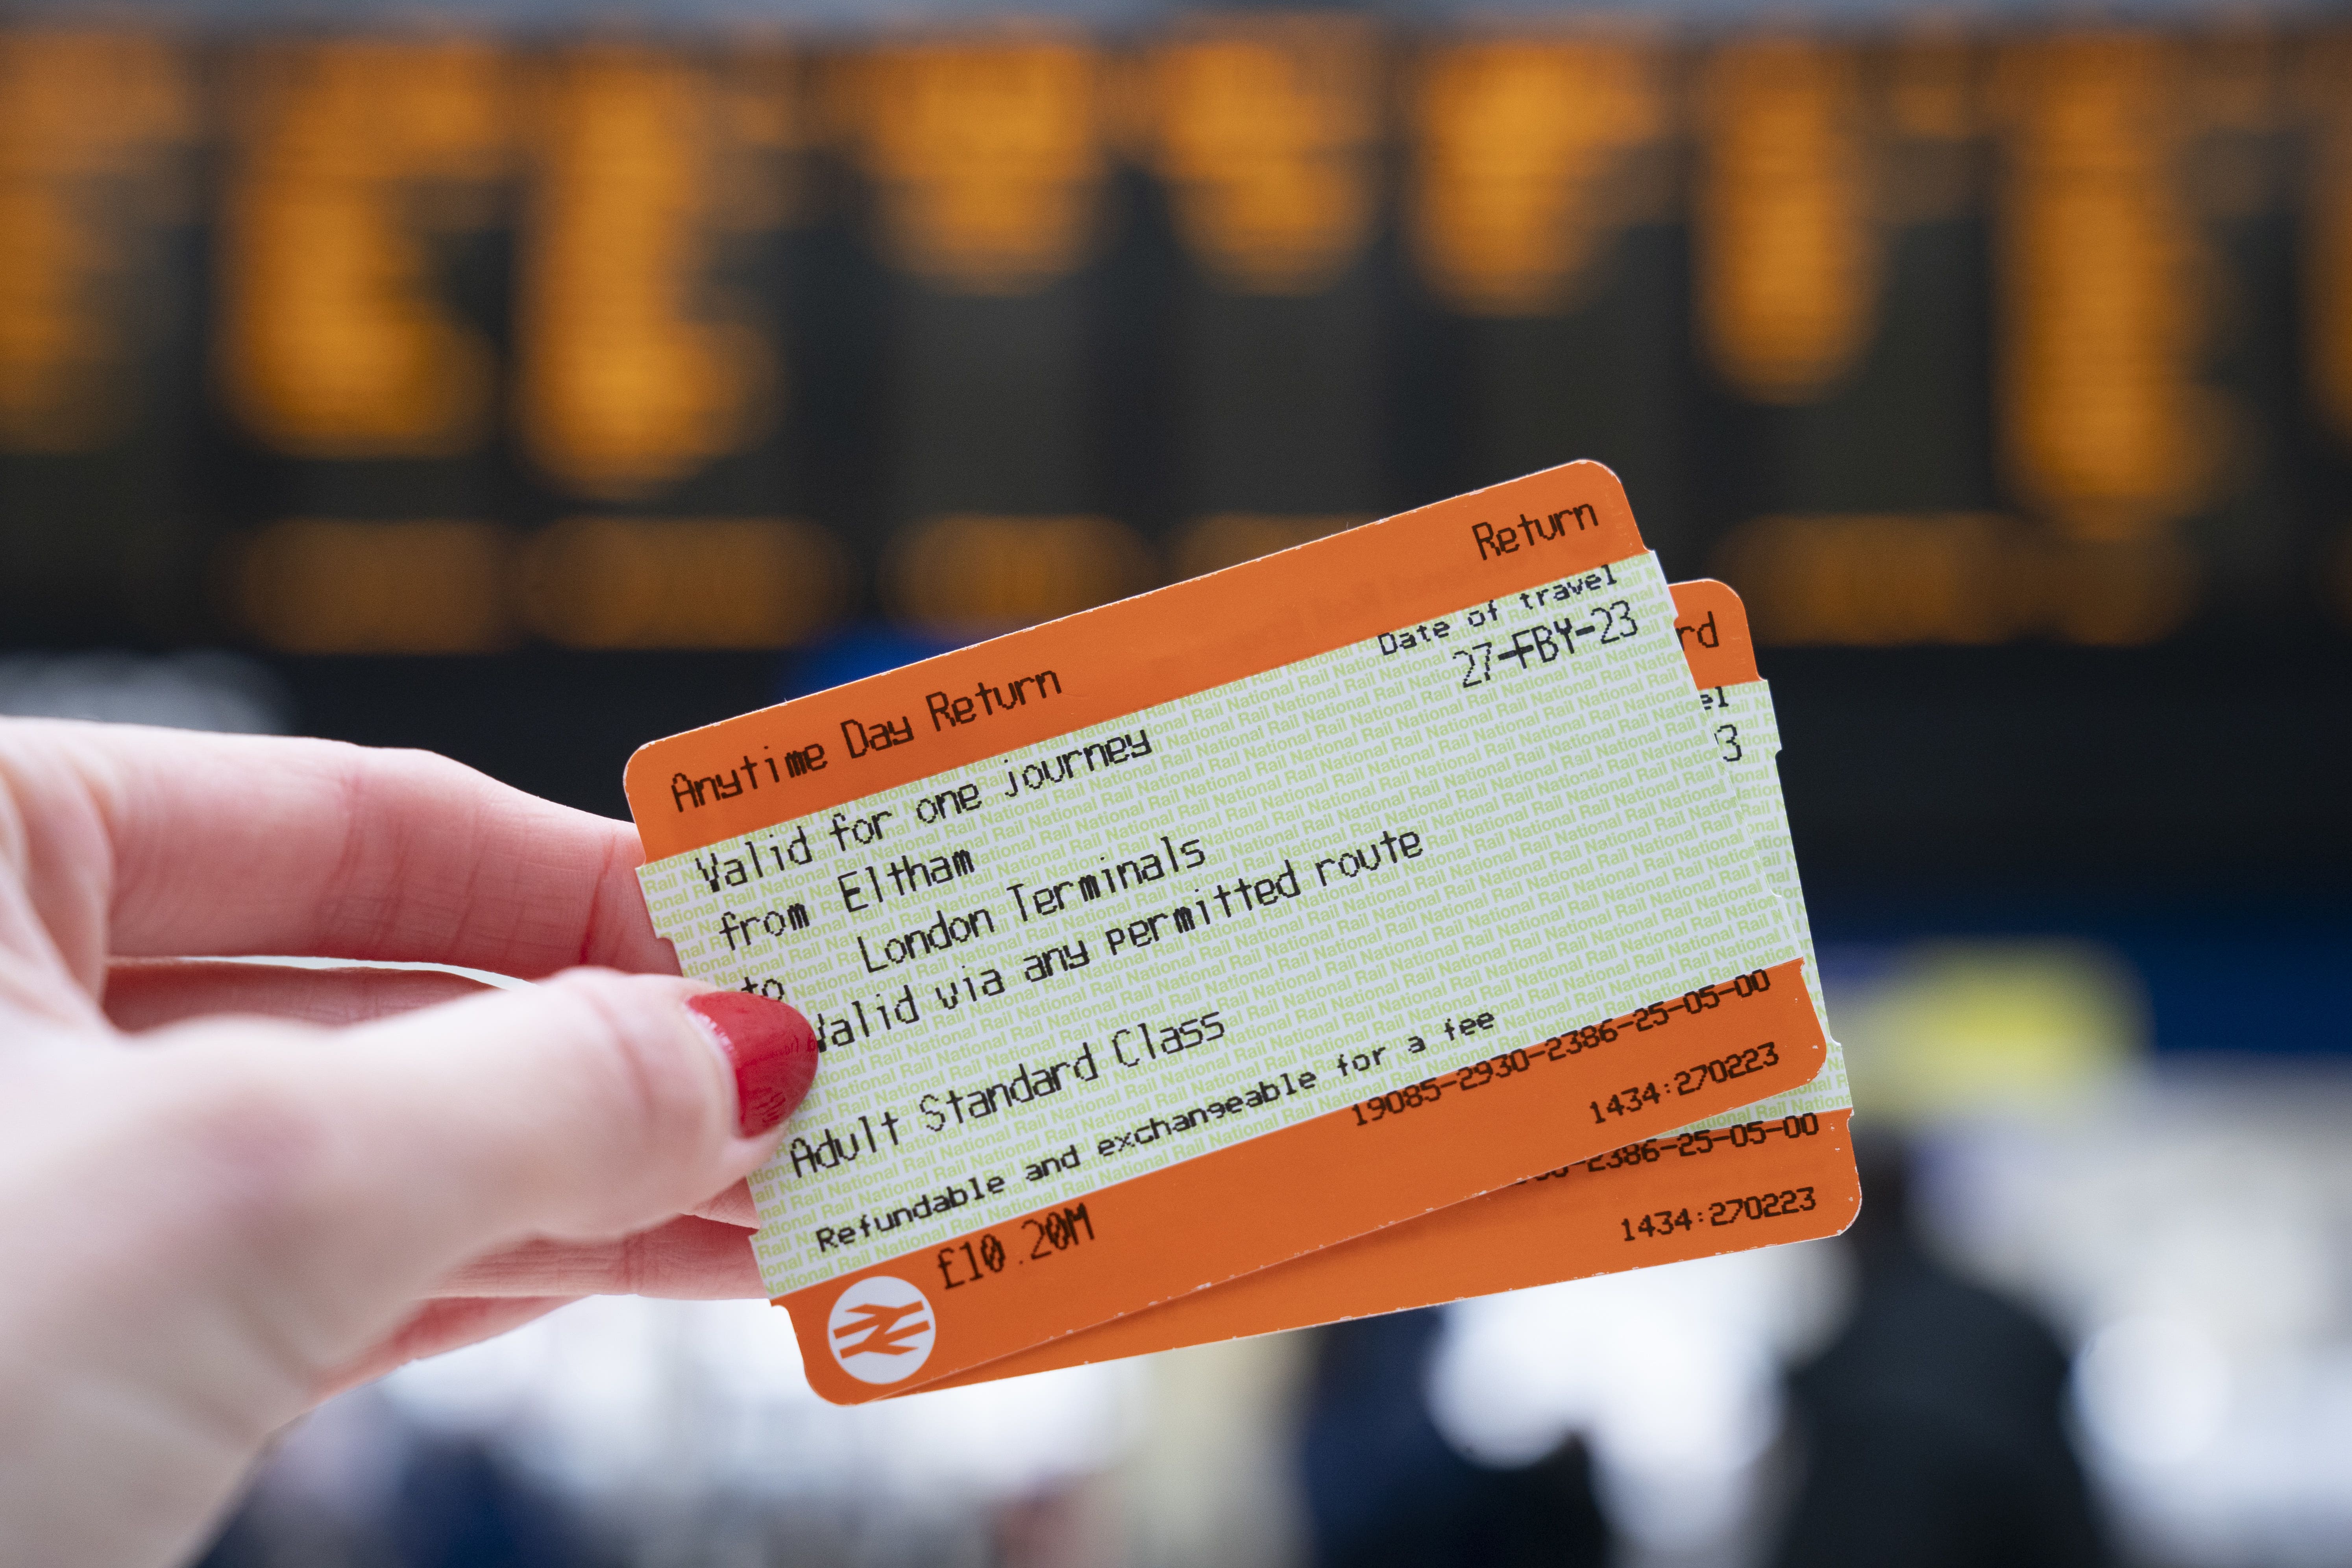 Rail fares in England and Wales rise by nearly 5% on Sunday despite train cancellations being among the highest level in 10 years